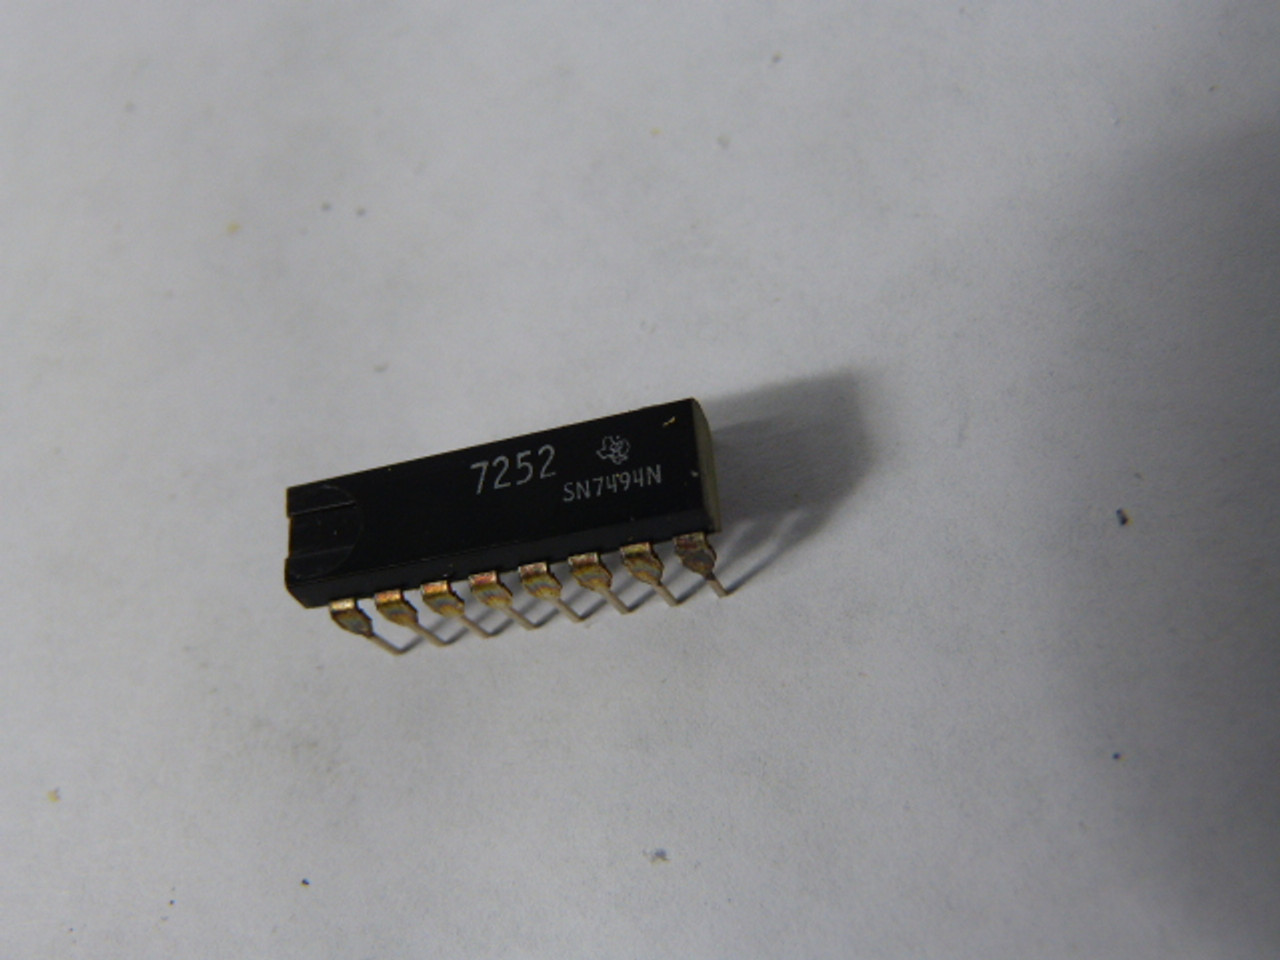 Texas Instruments SN7494N Plastic Dipped 14 Pin Integrated Circuit USED